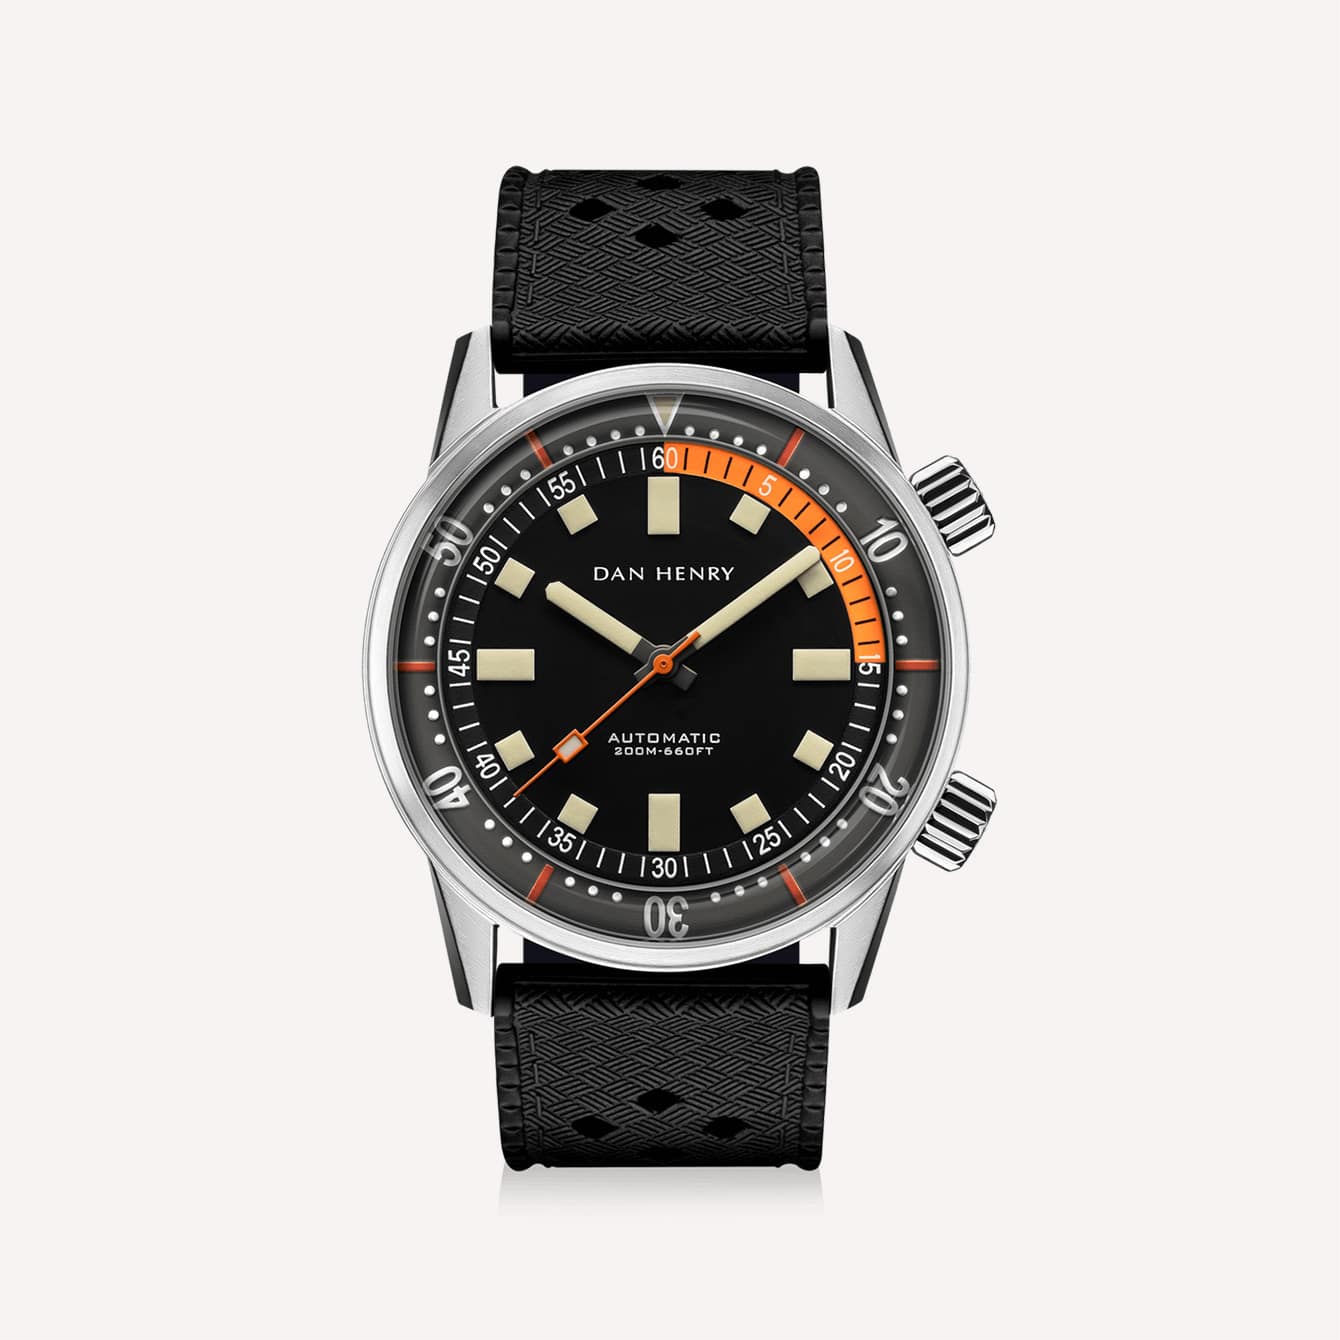 Dan Henry Watches 1970 Automatic Diver Watch